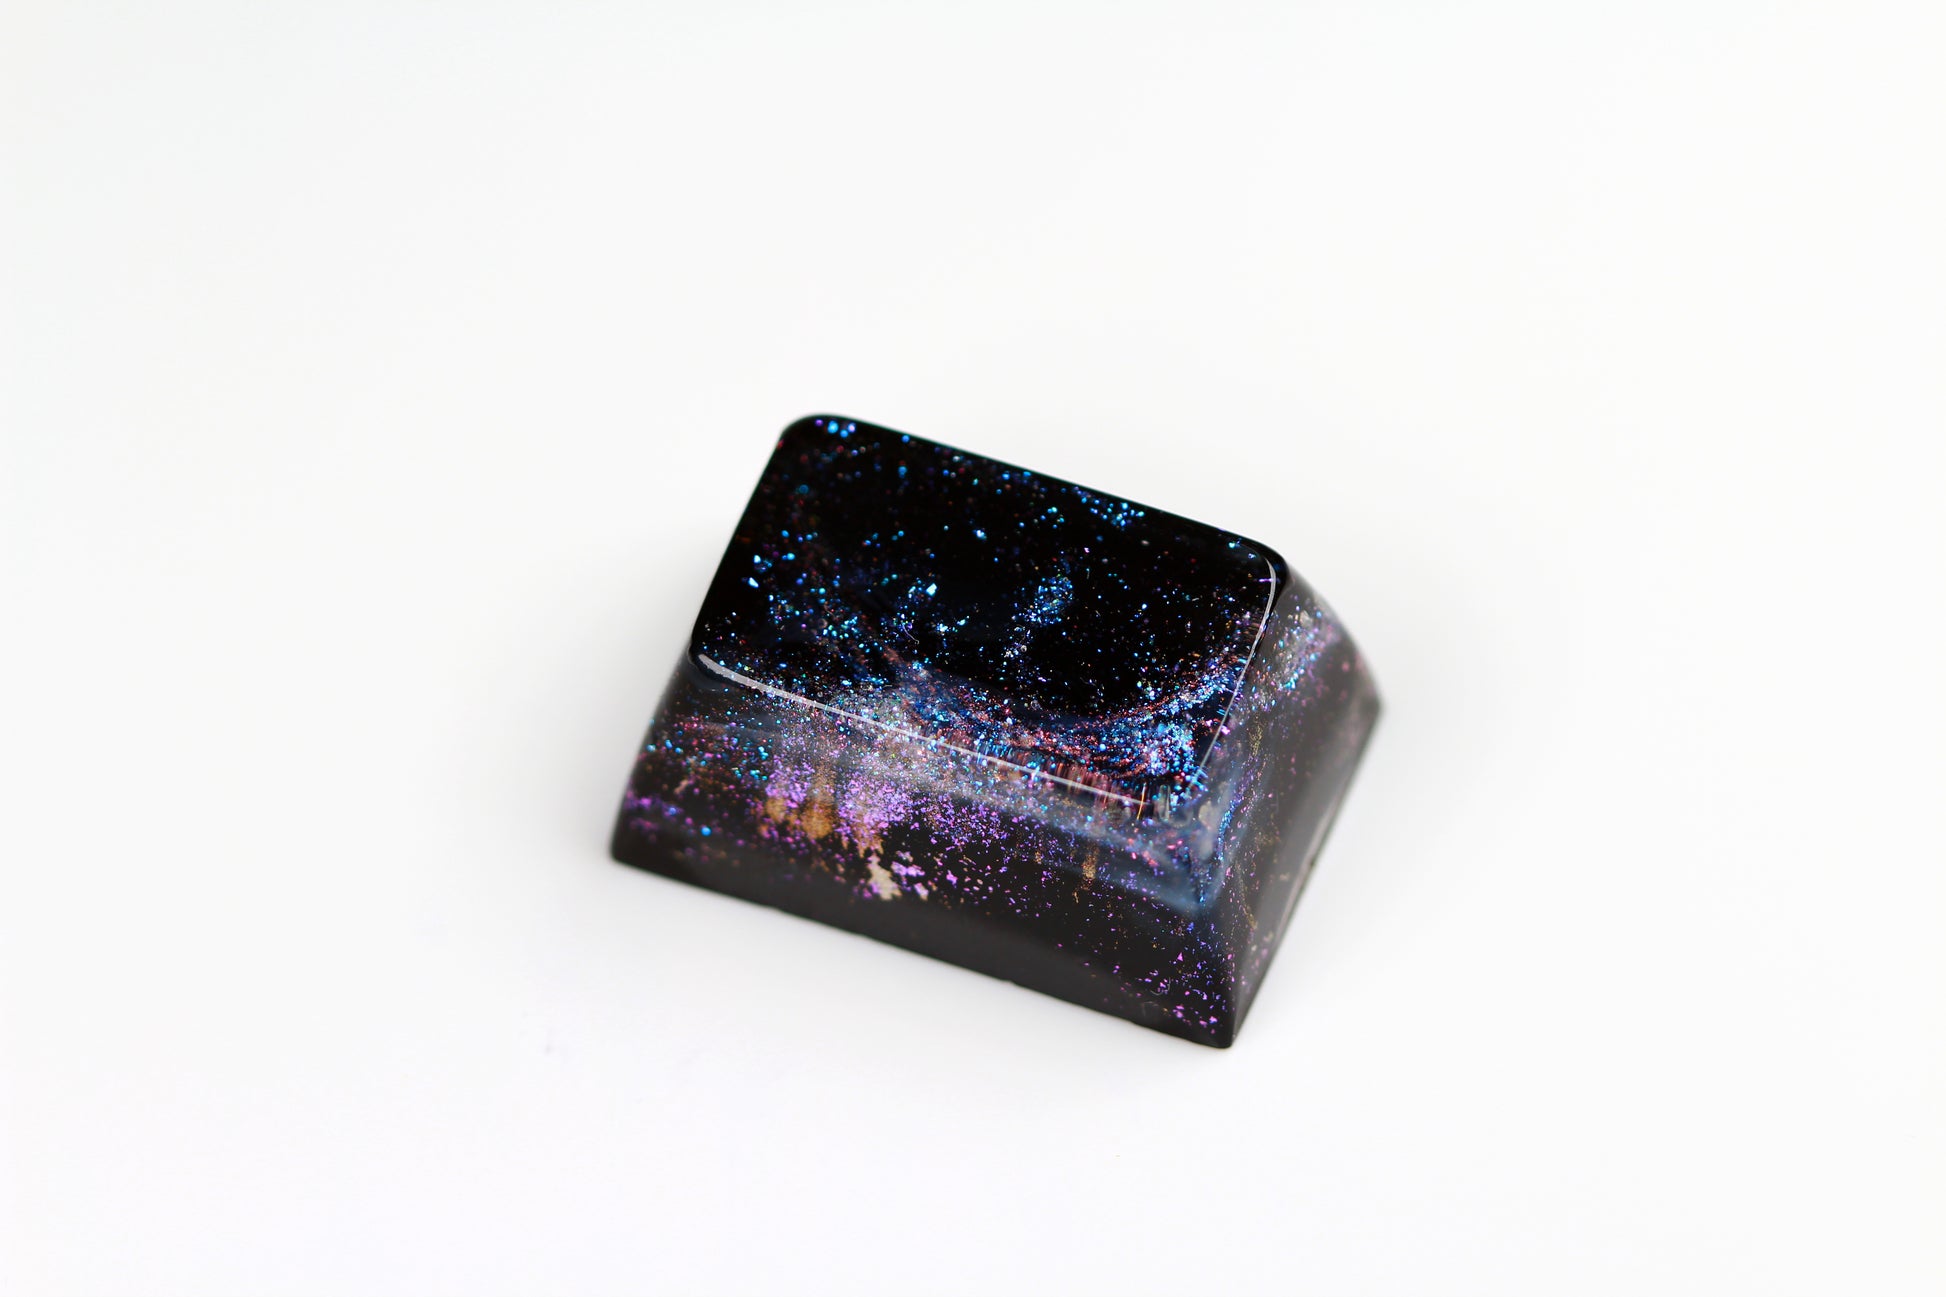 Gimpy SA Row 2, 1.5u - Deep Field Particle Stream 2 - PrimeCaps Keycap - Blank and Sculpted Artisan Keycaps for cherry MX mechanical keyboards 